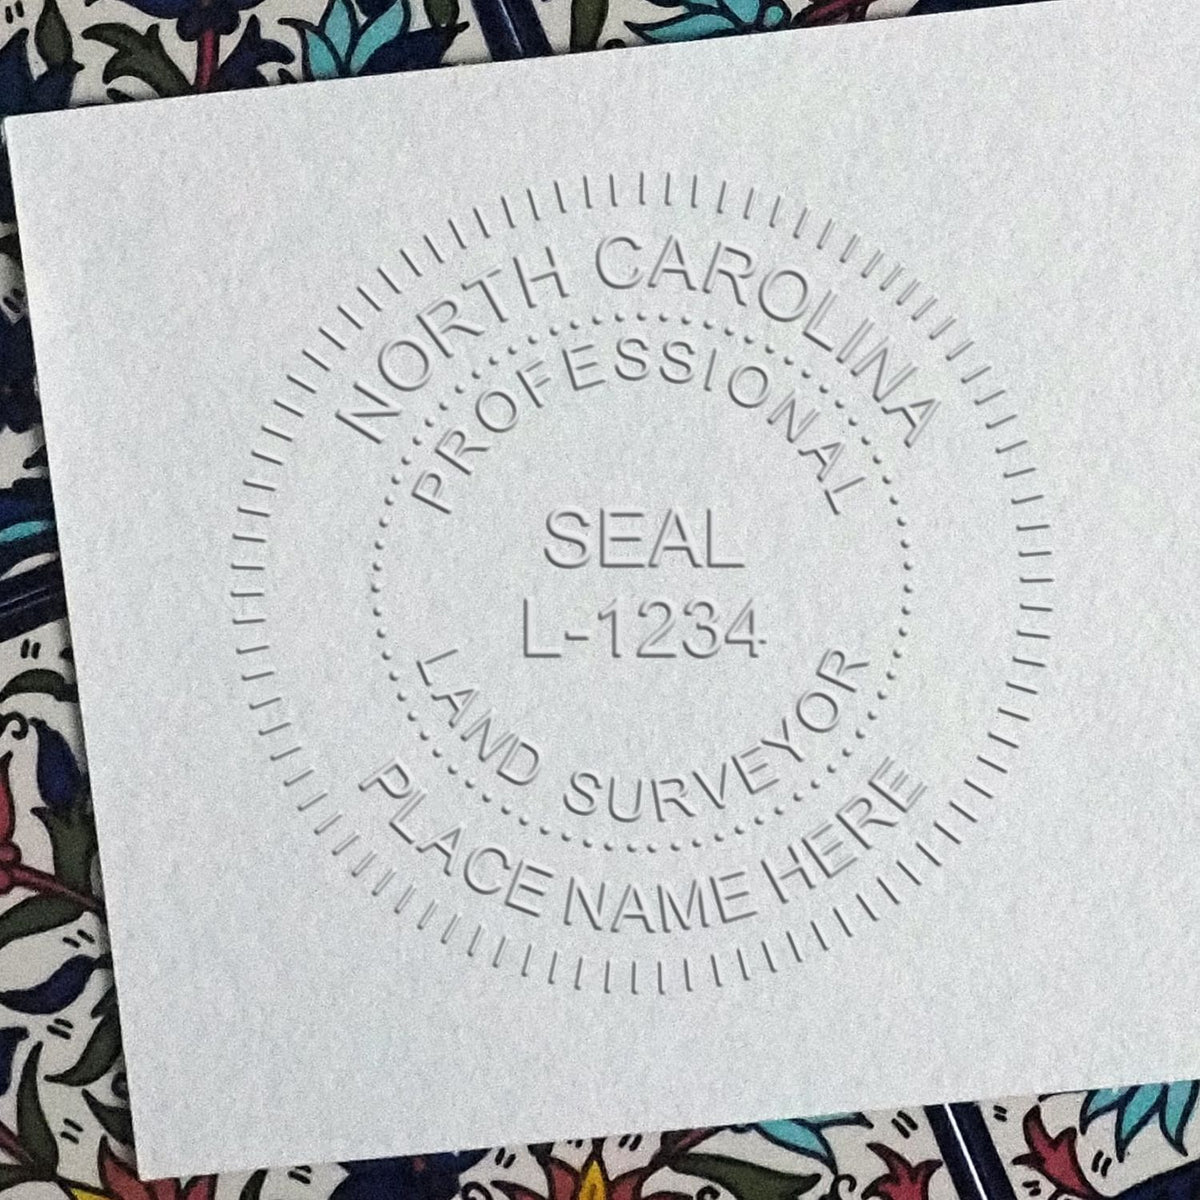 An in use photo of the Hybrid North Carolina Land Surveyor Seal showing a sample imprint on a cardstock